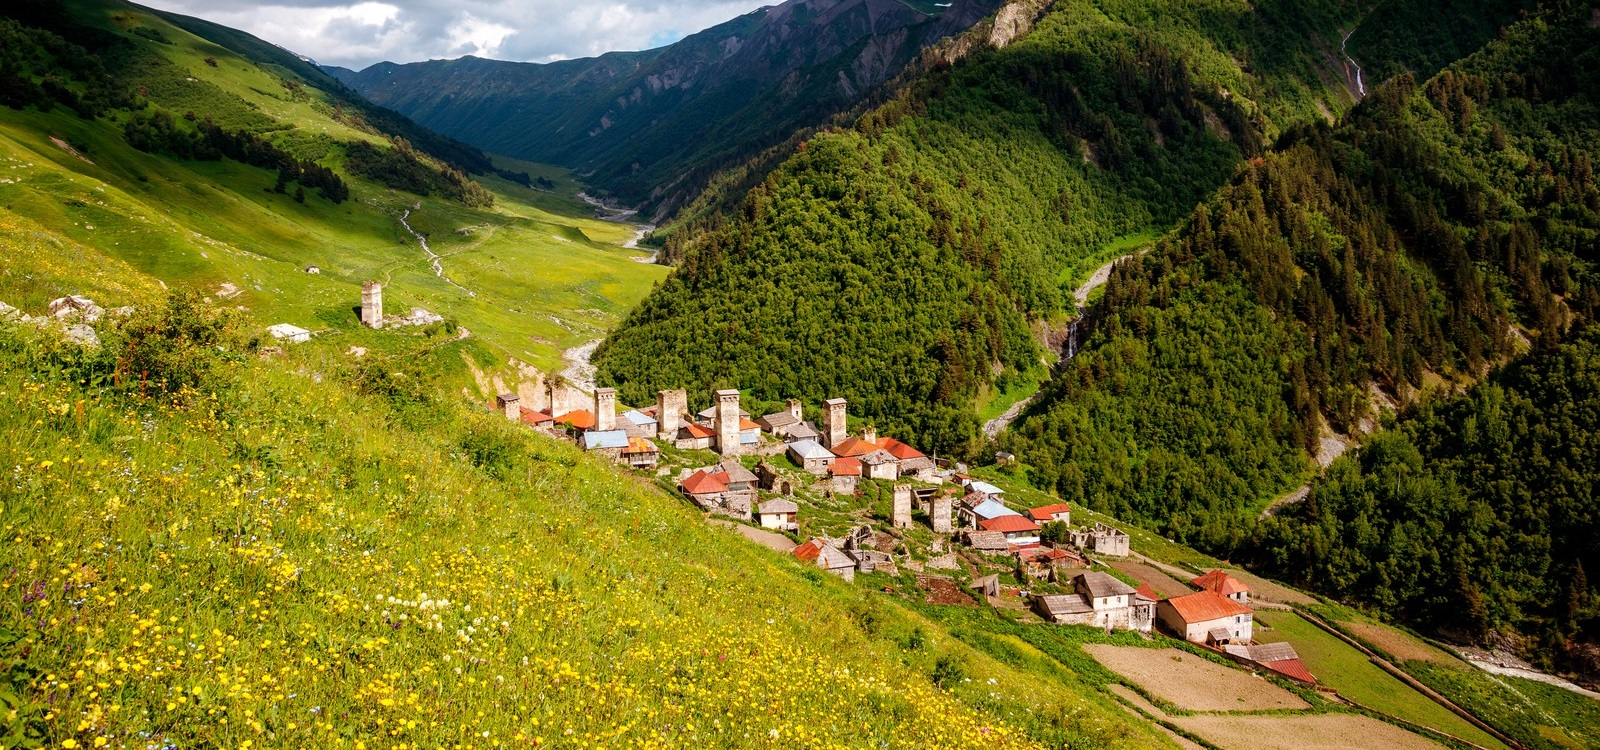 USHGULI - FROM EARTH TO GALAXY ONE VILLAGE